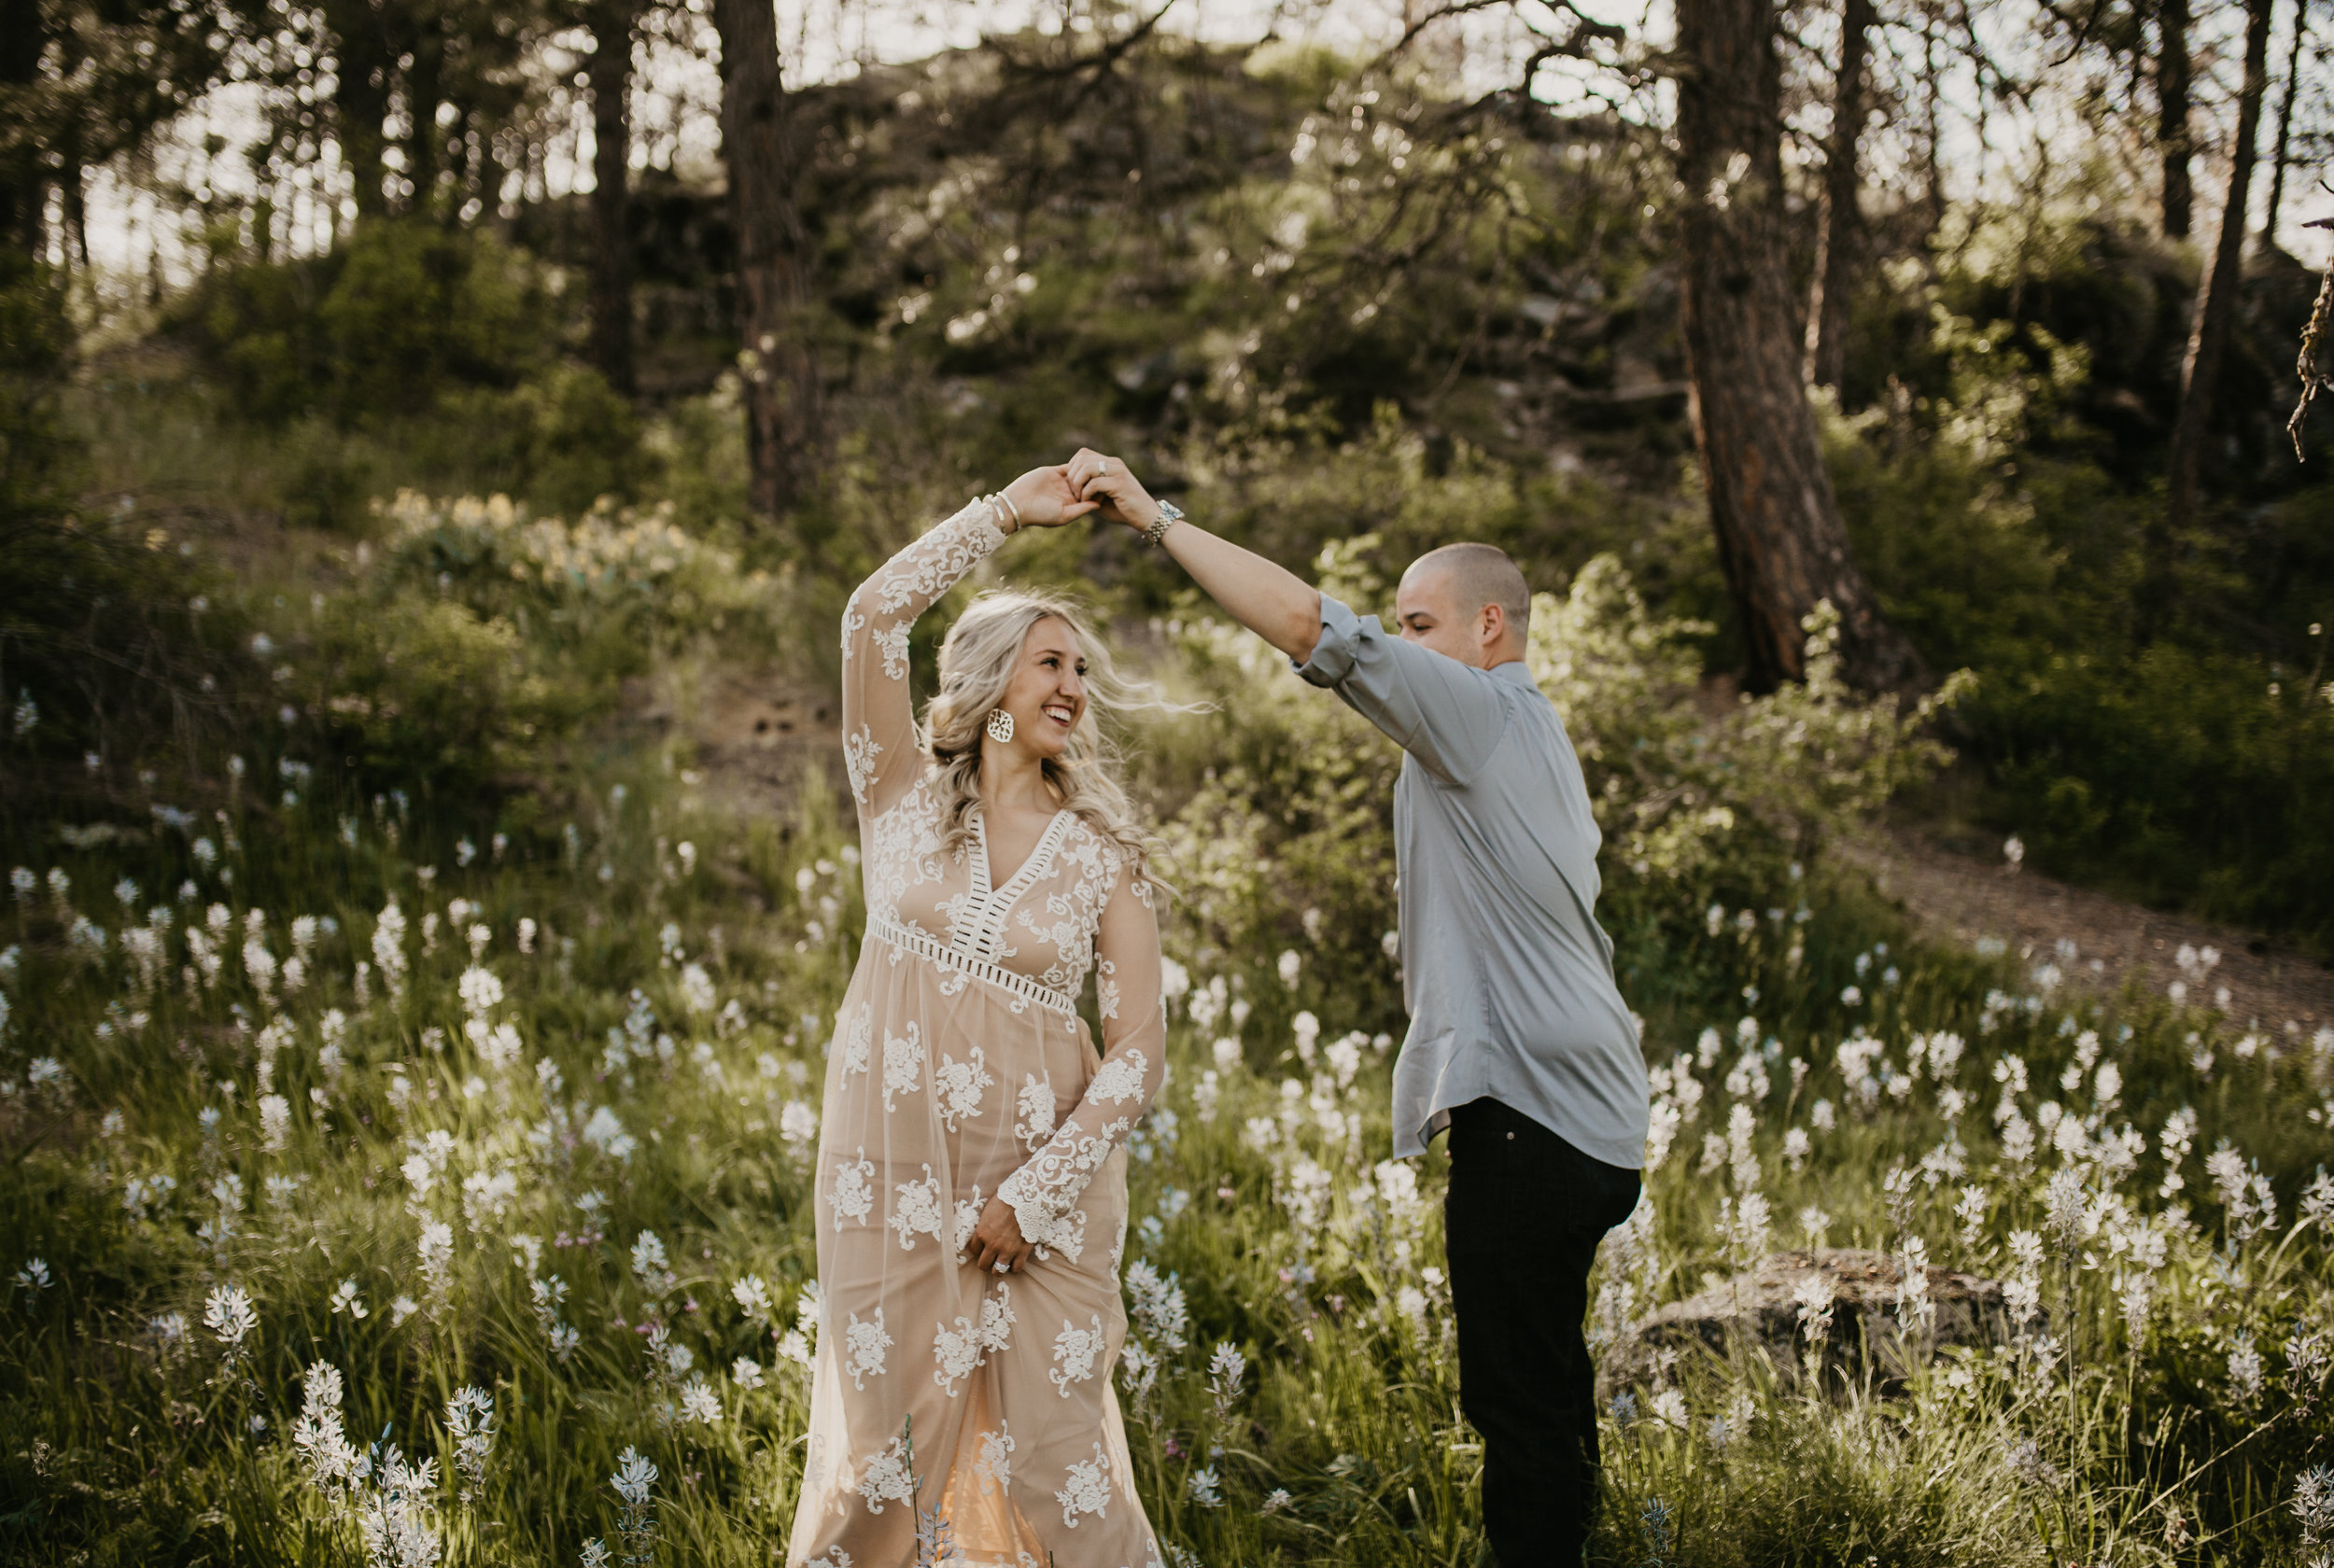  Couple dancing during engagement session in a field of wildflowers 